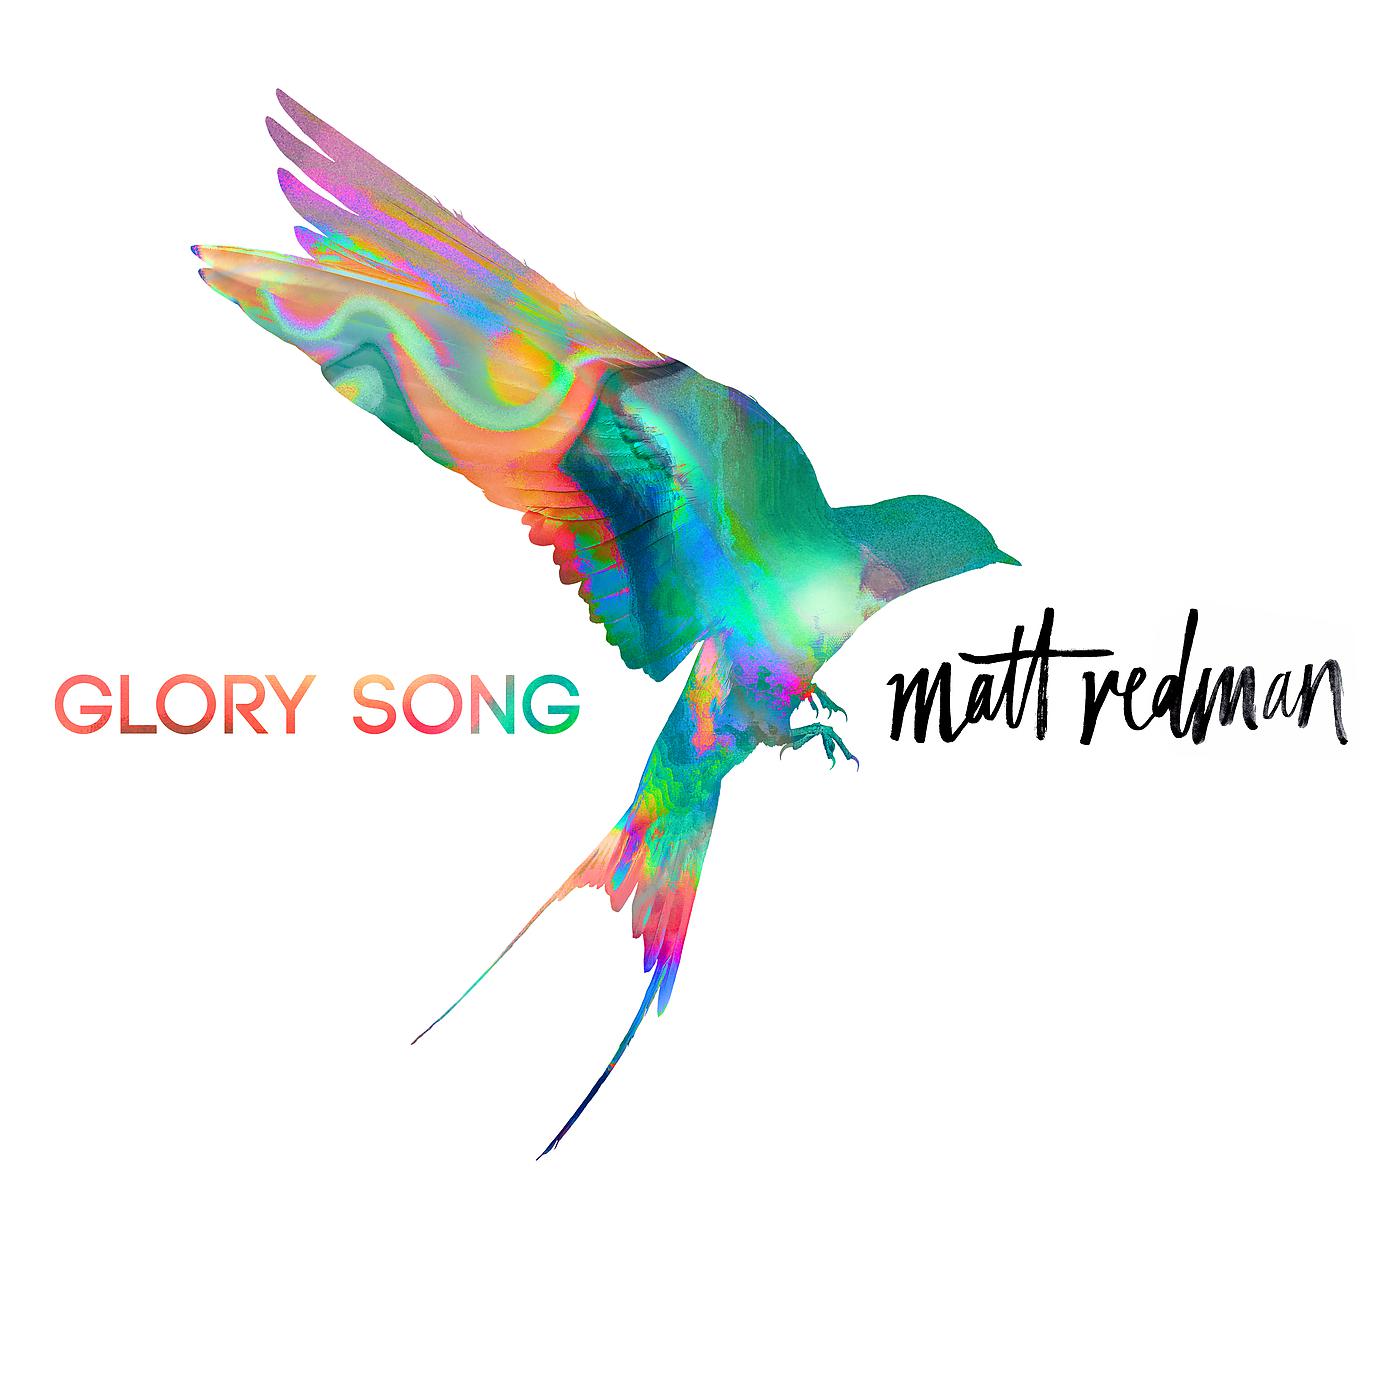 Глори песни. Matt Redman - Glory Song. Песня glorious. I'M A glorious Song. Matt Redman - Revival Generation: i could Sing of your Love Forever.